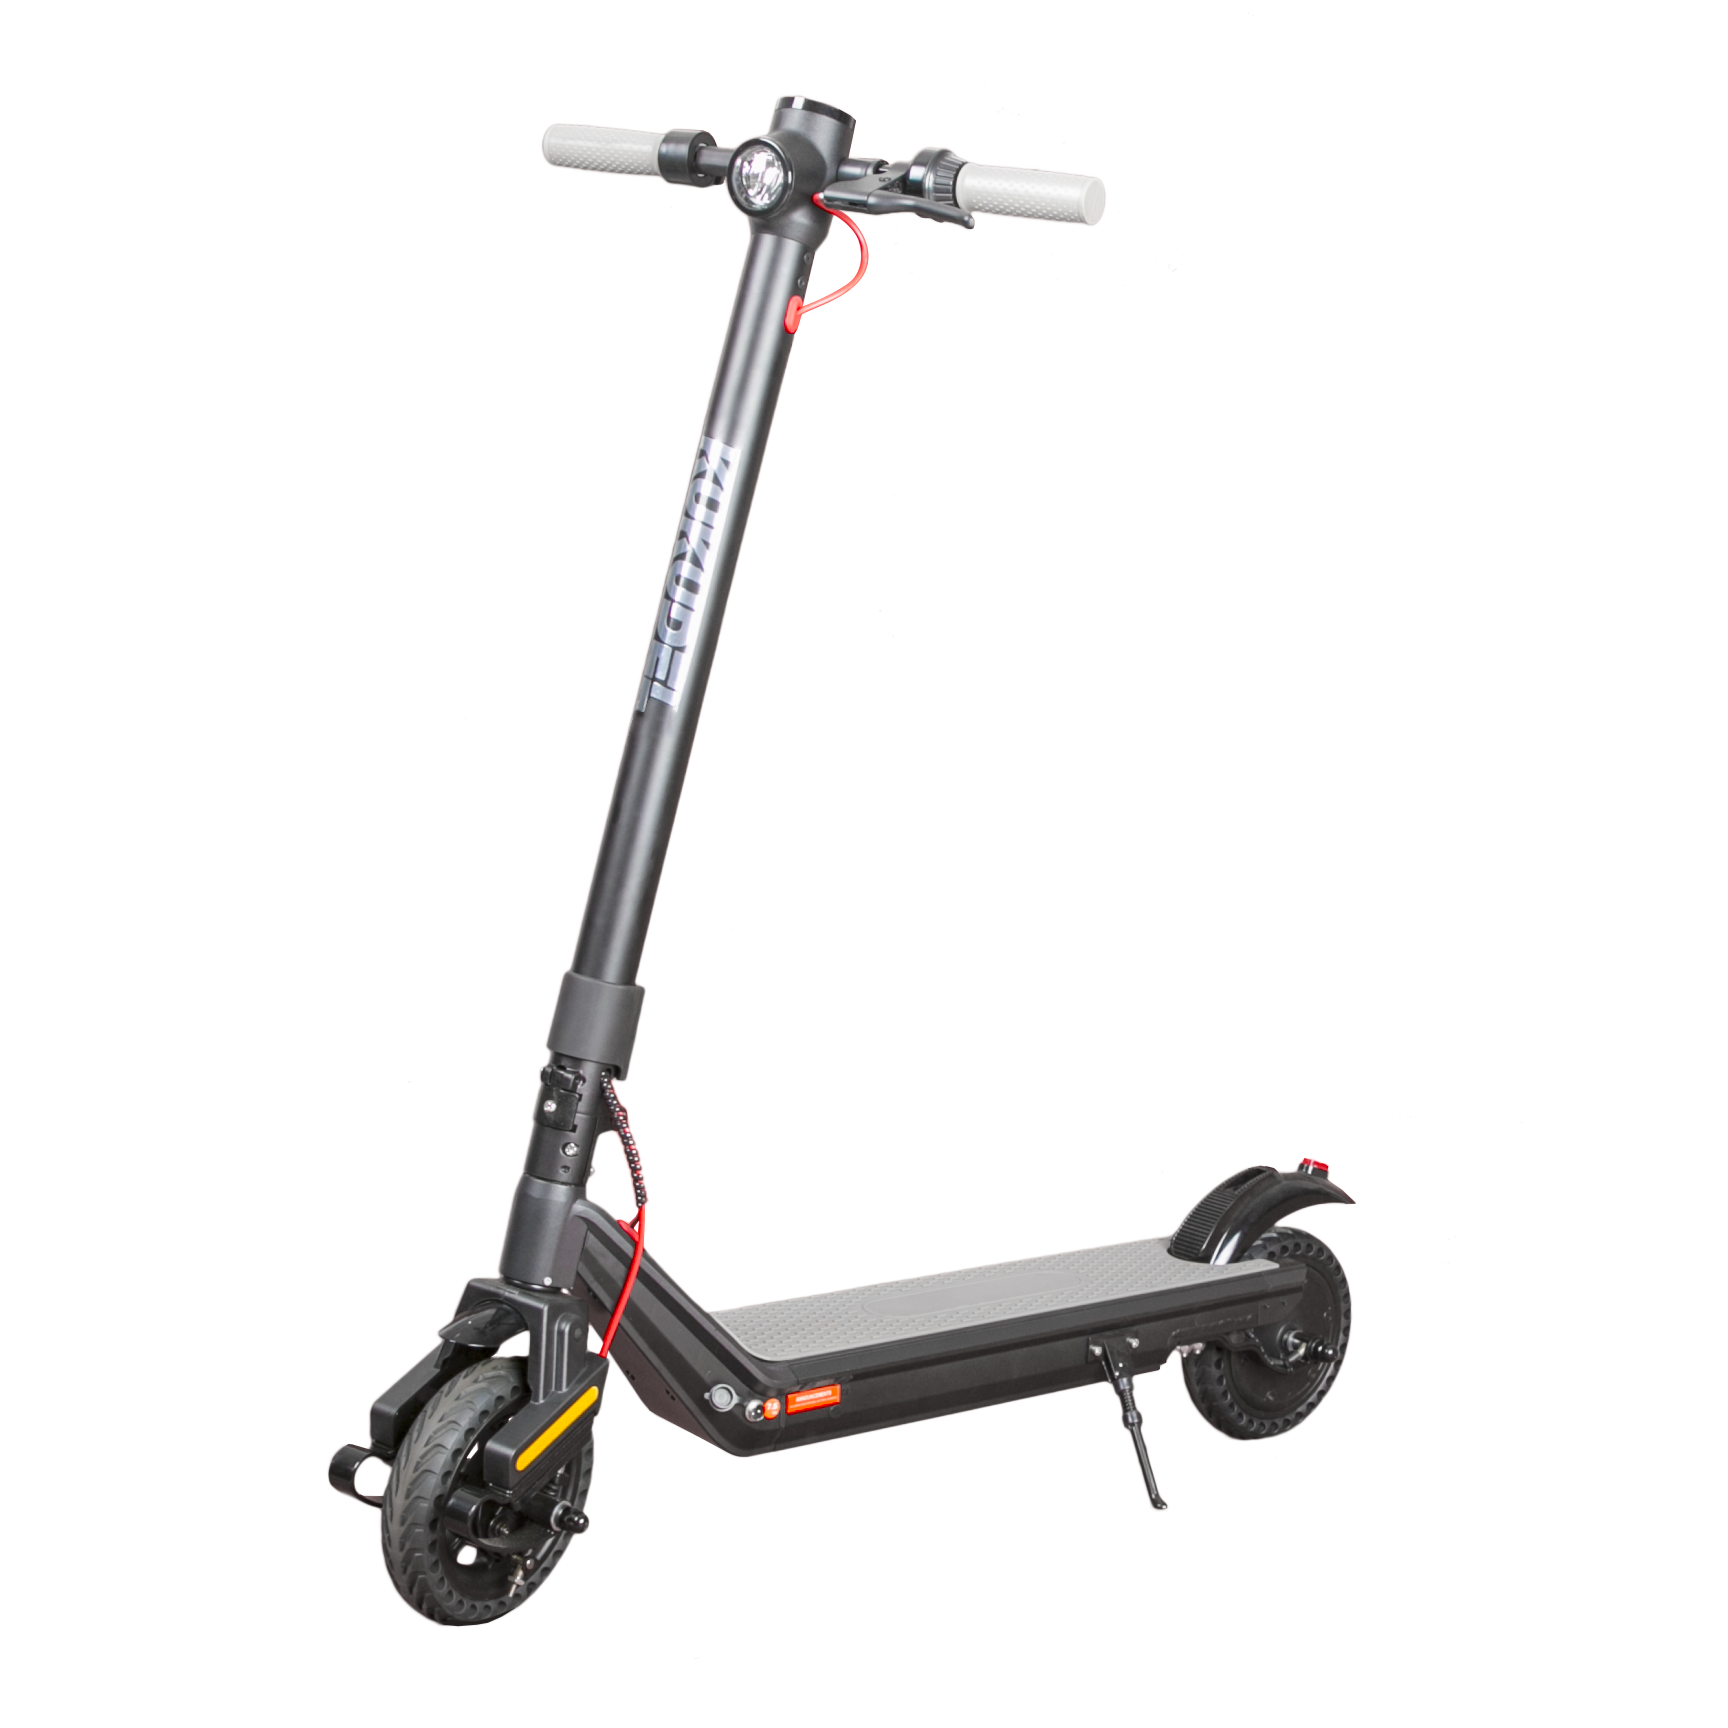 [EU DIRECT] KUKUDEL 856P Electric Scooter 36V 7.5Ah Battery 250W Brushless Motor 25Km/h Max Speed 26-40Km Mileage 100Kg Max Load 8.5Inch Scooter